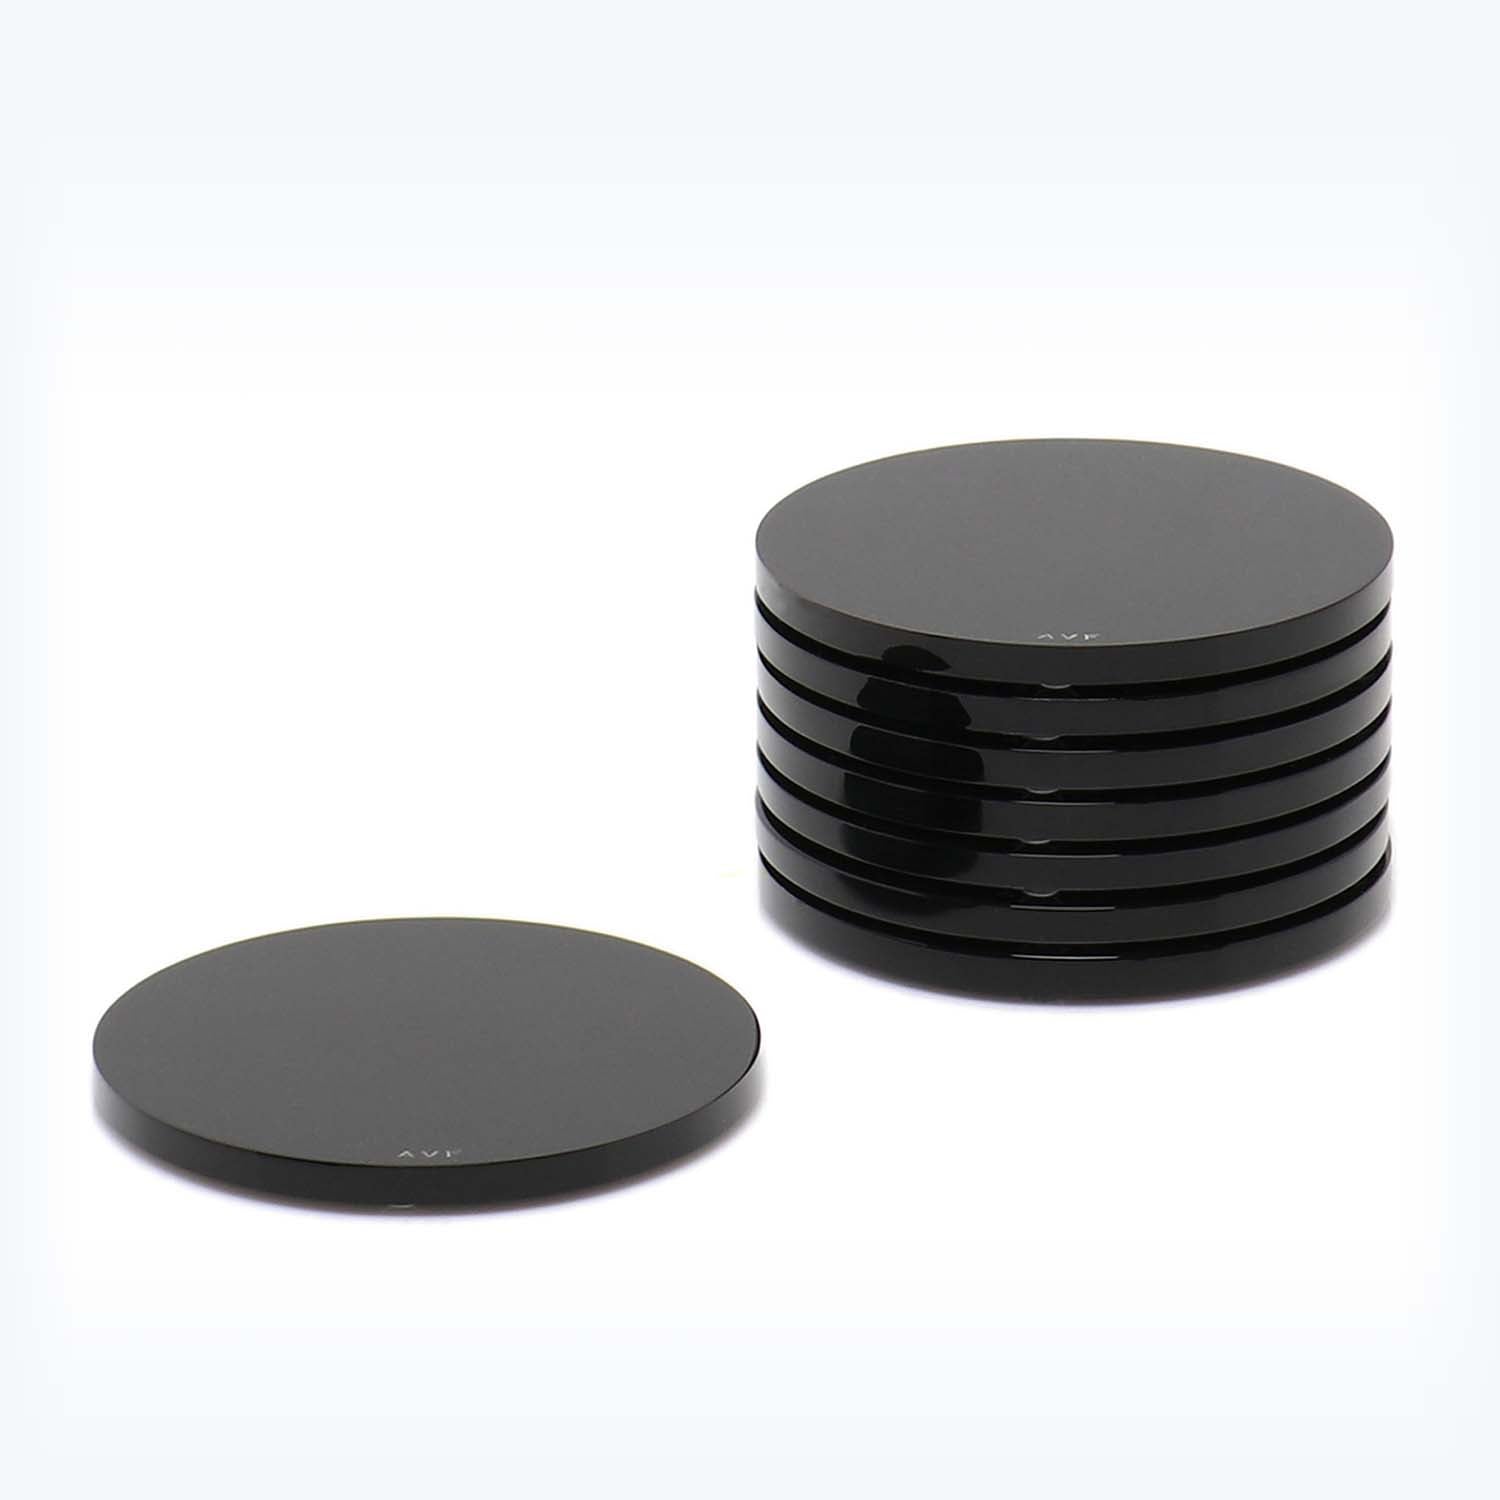 Two disk-shaped objects, one flat and one stacked, against white background.